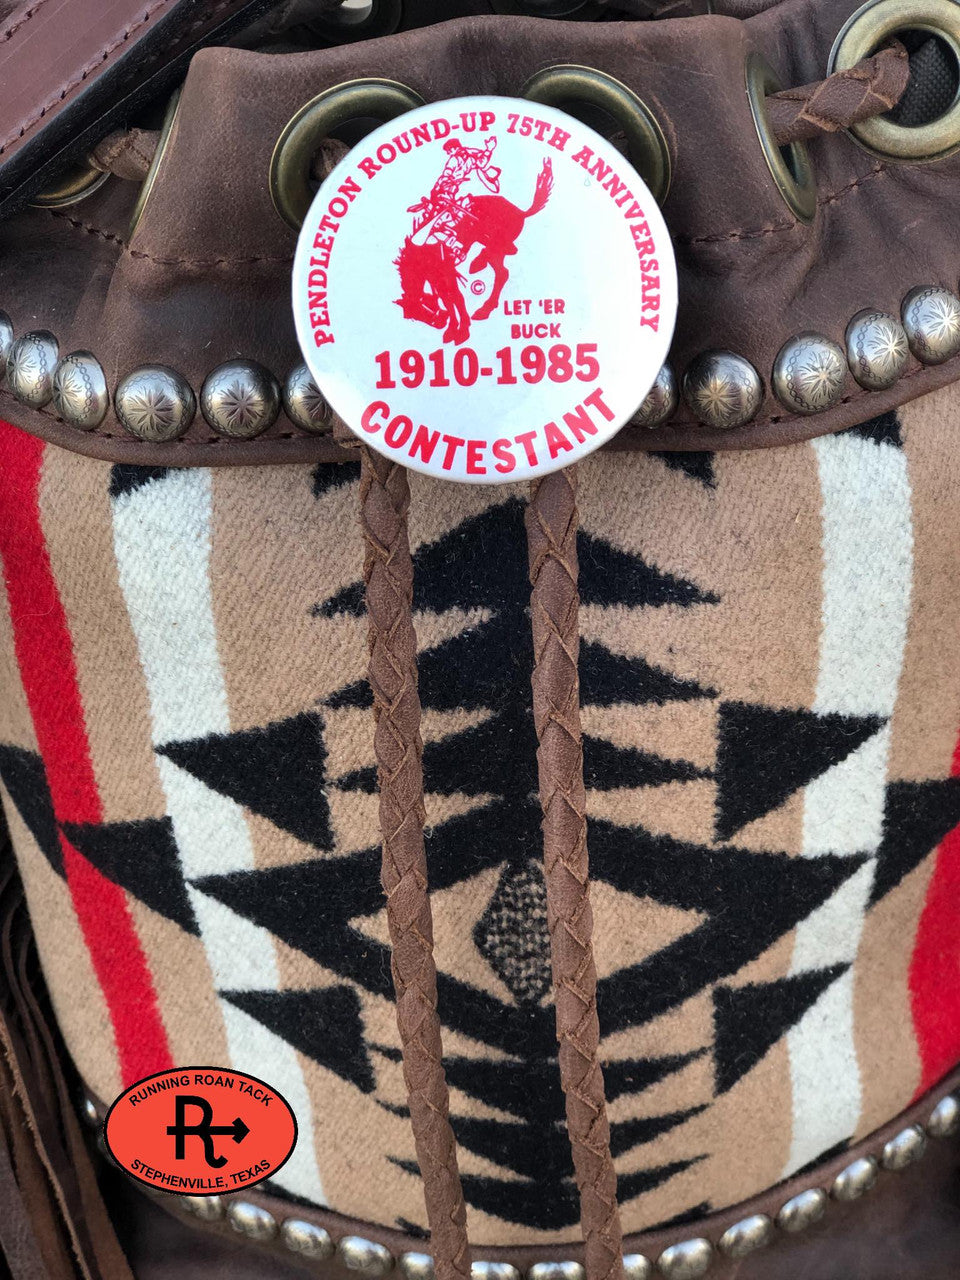 No. 01 - "The Bolo" Cross Body Fringed Bucket Bag with Wool and Antique 1985 Pendleton Round-Up Contestant Pin